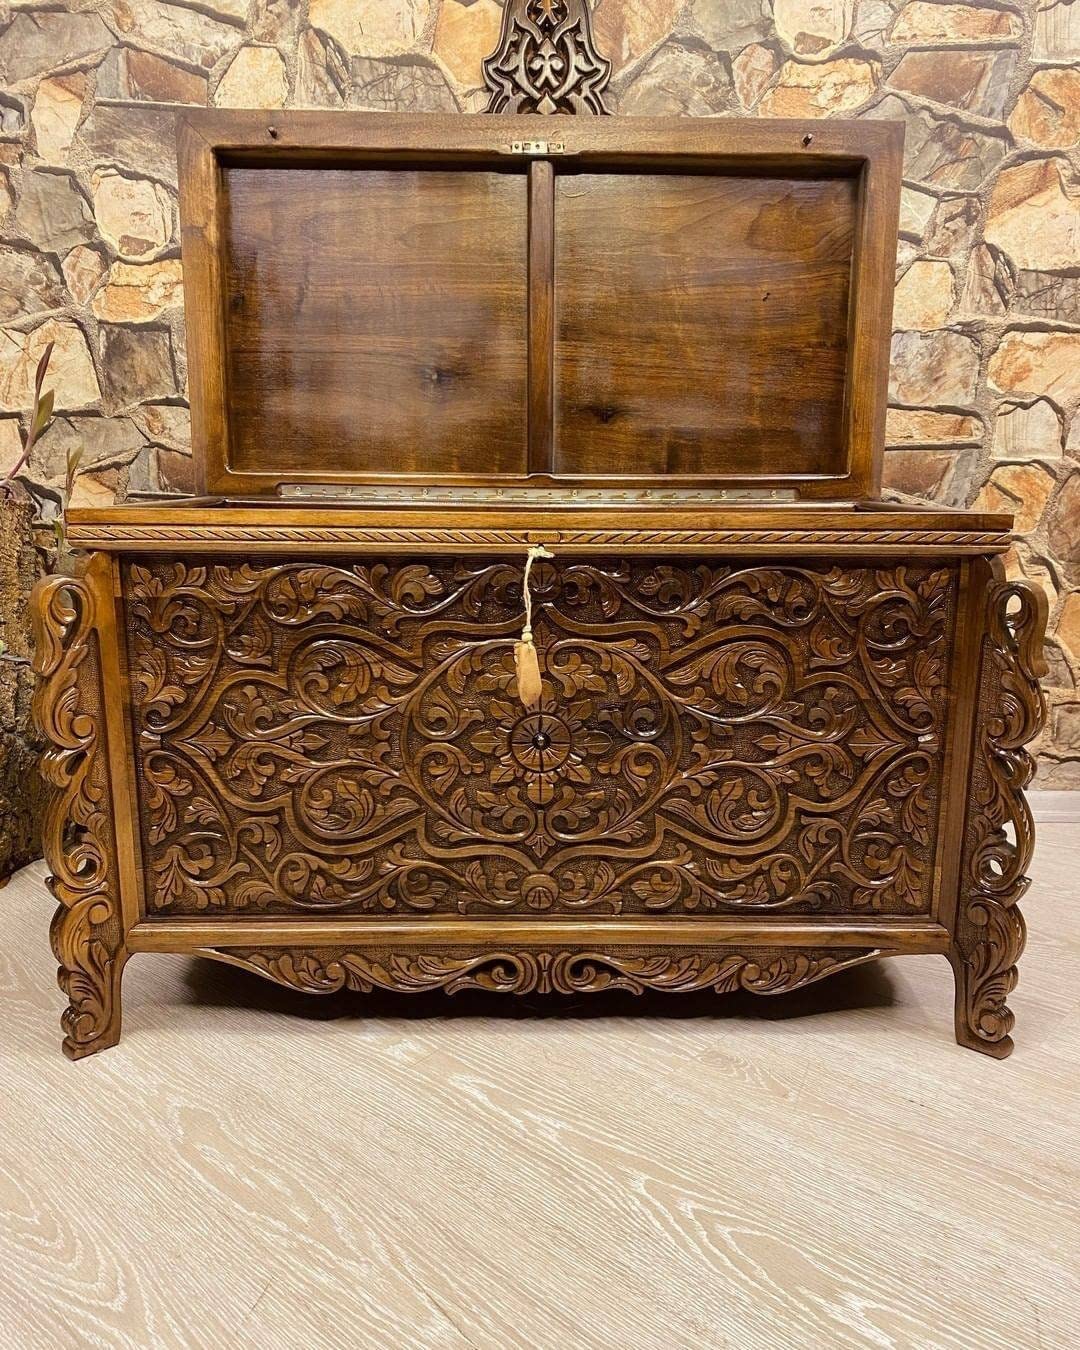 Detailed carving on walnut wood chest